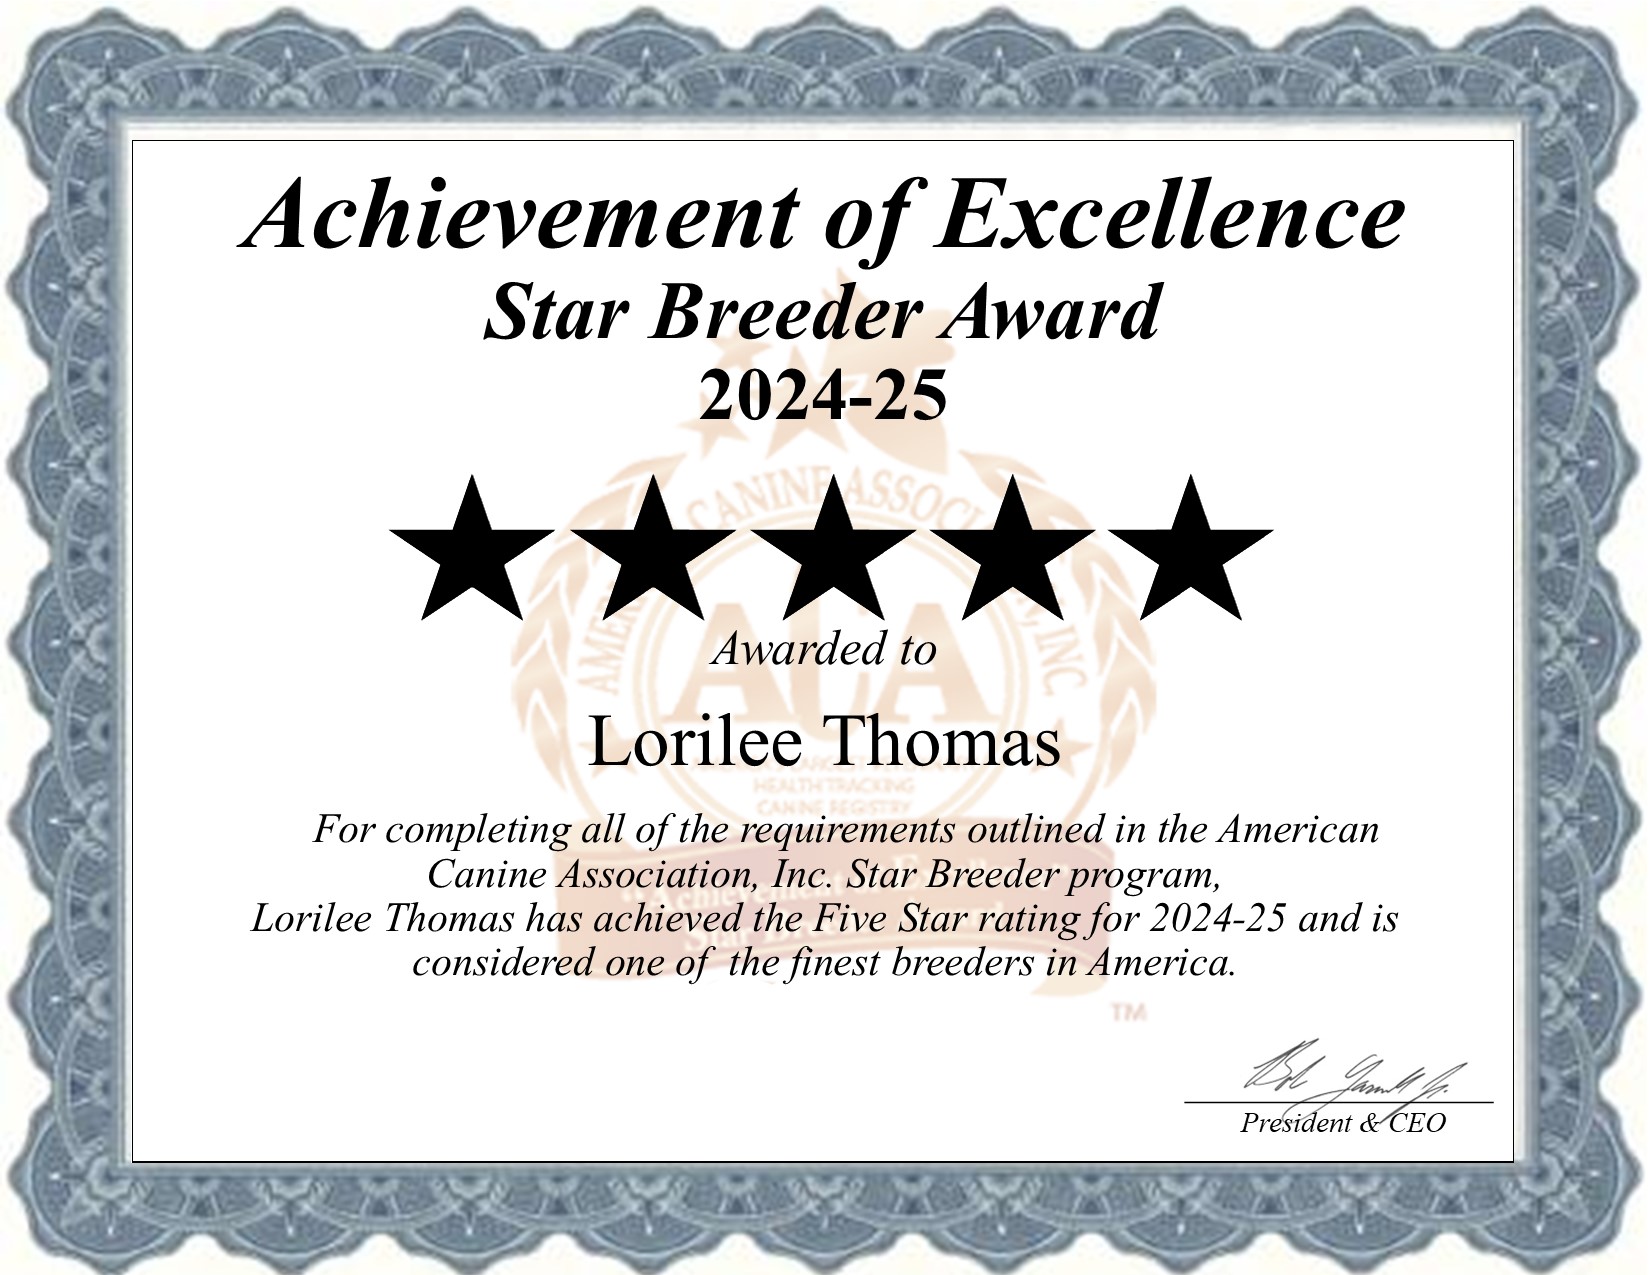 Lorilee, Thomas, dog, breeder, star, certificate, Lorilee-Thomas, Whiting, KS, Kansas, puppy, dog, kennels, mill, puppymill, usda, 5-star, aca, ica, registered, Poodle